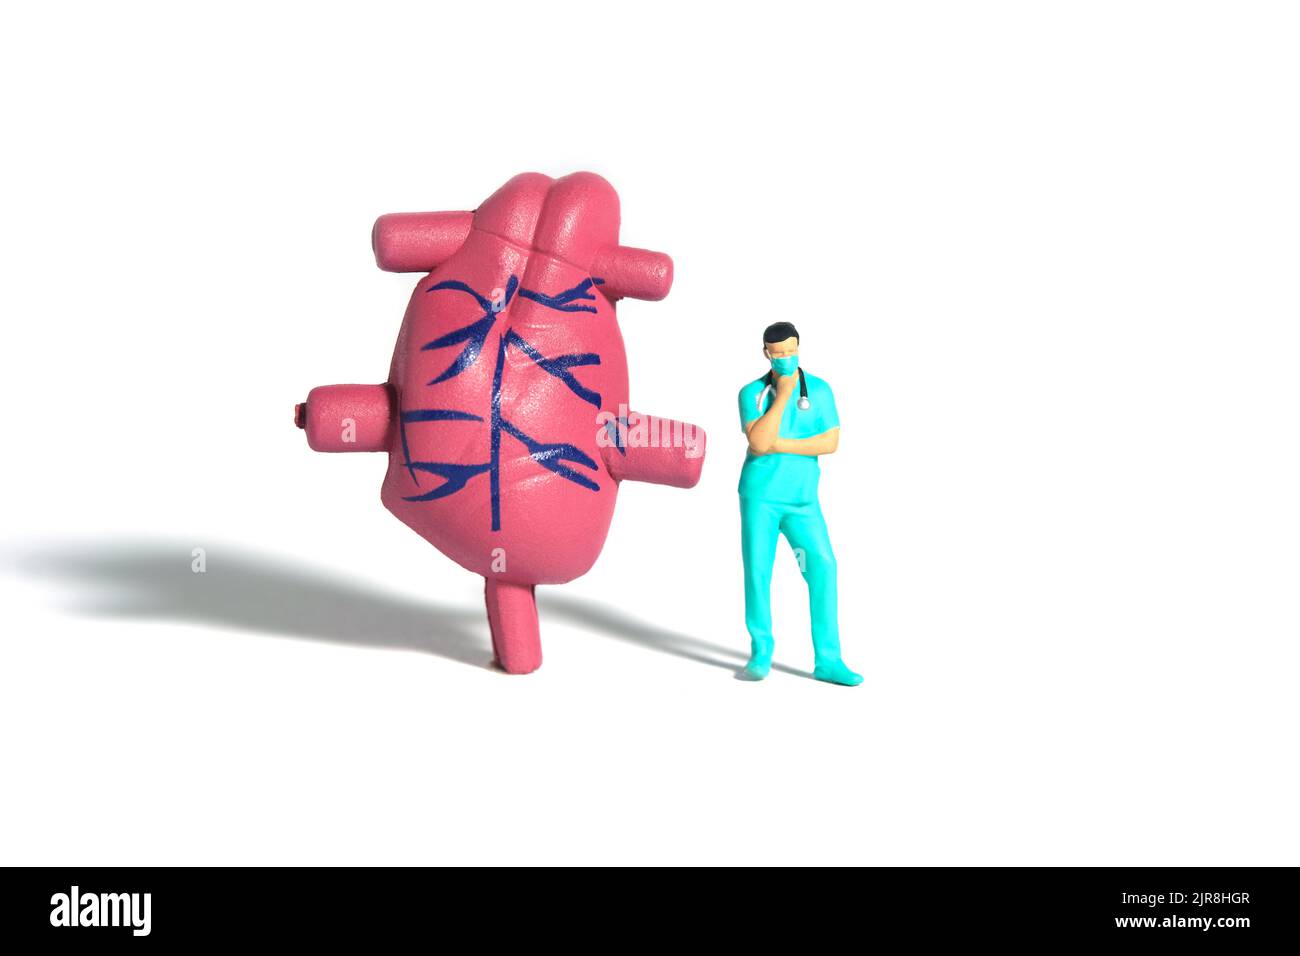 Miniature people toy figure photography. A men doctor or nurse thinking while standing in front of heart organ. Isolated white background. Image photo Stock Photo